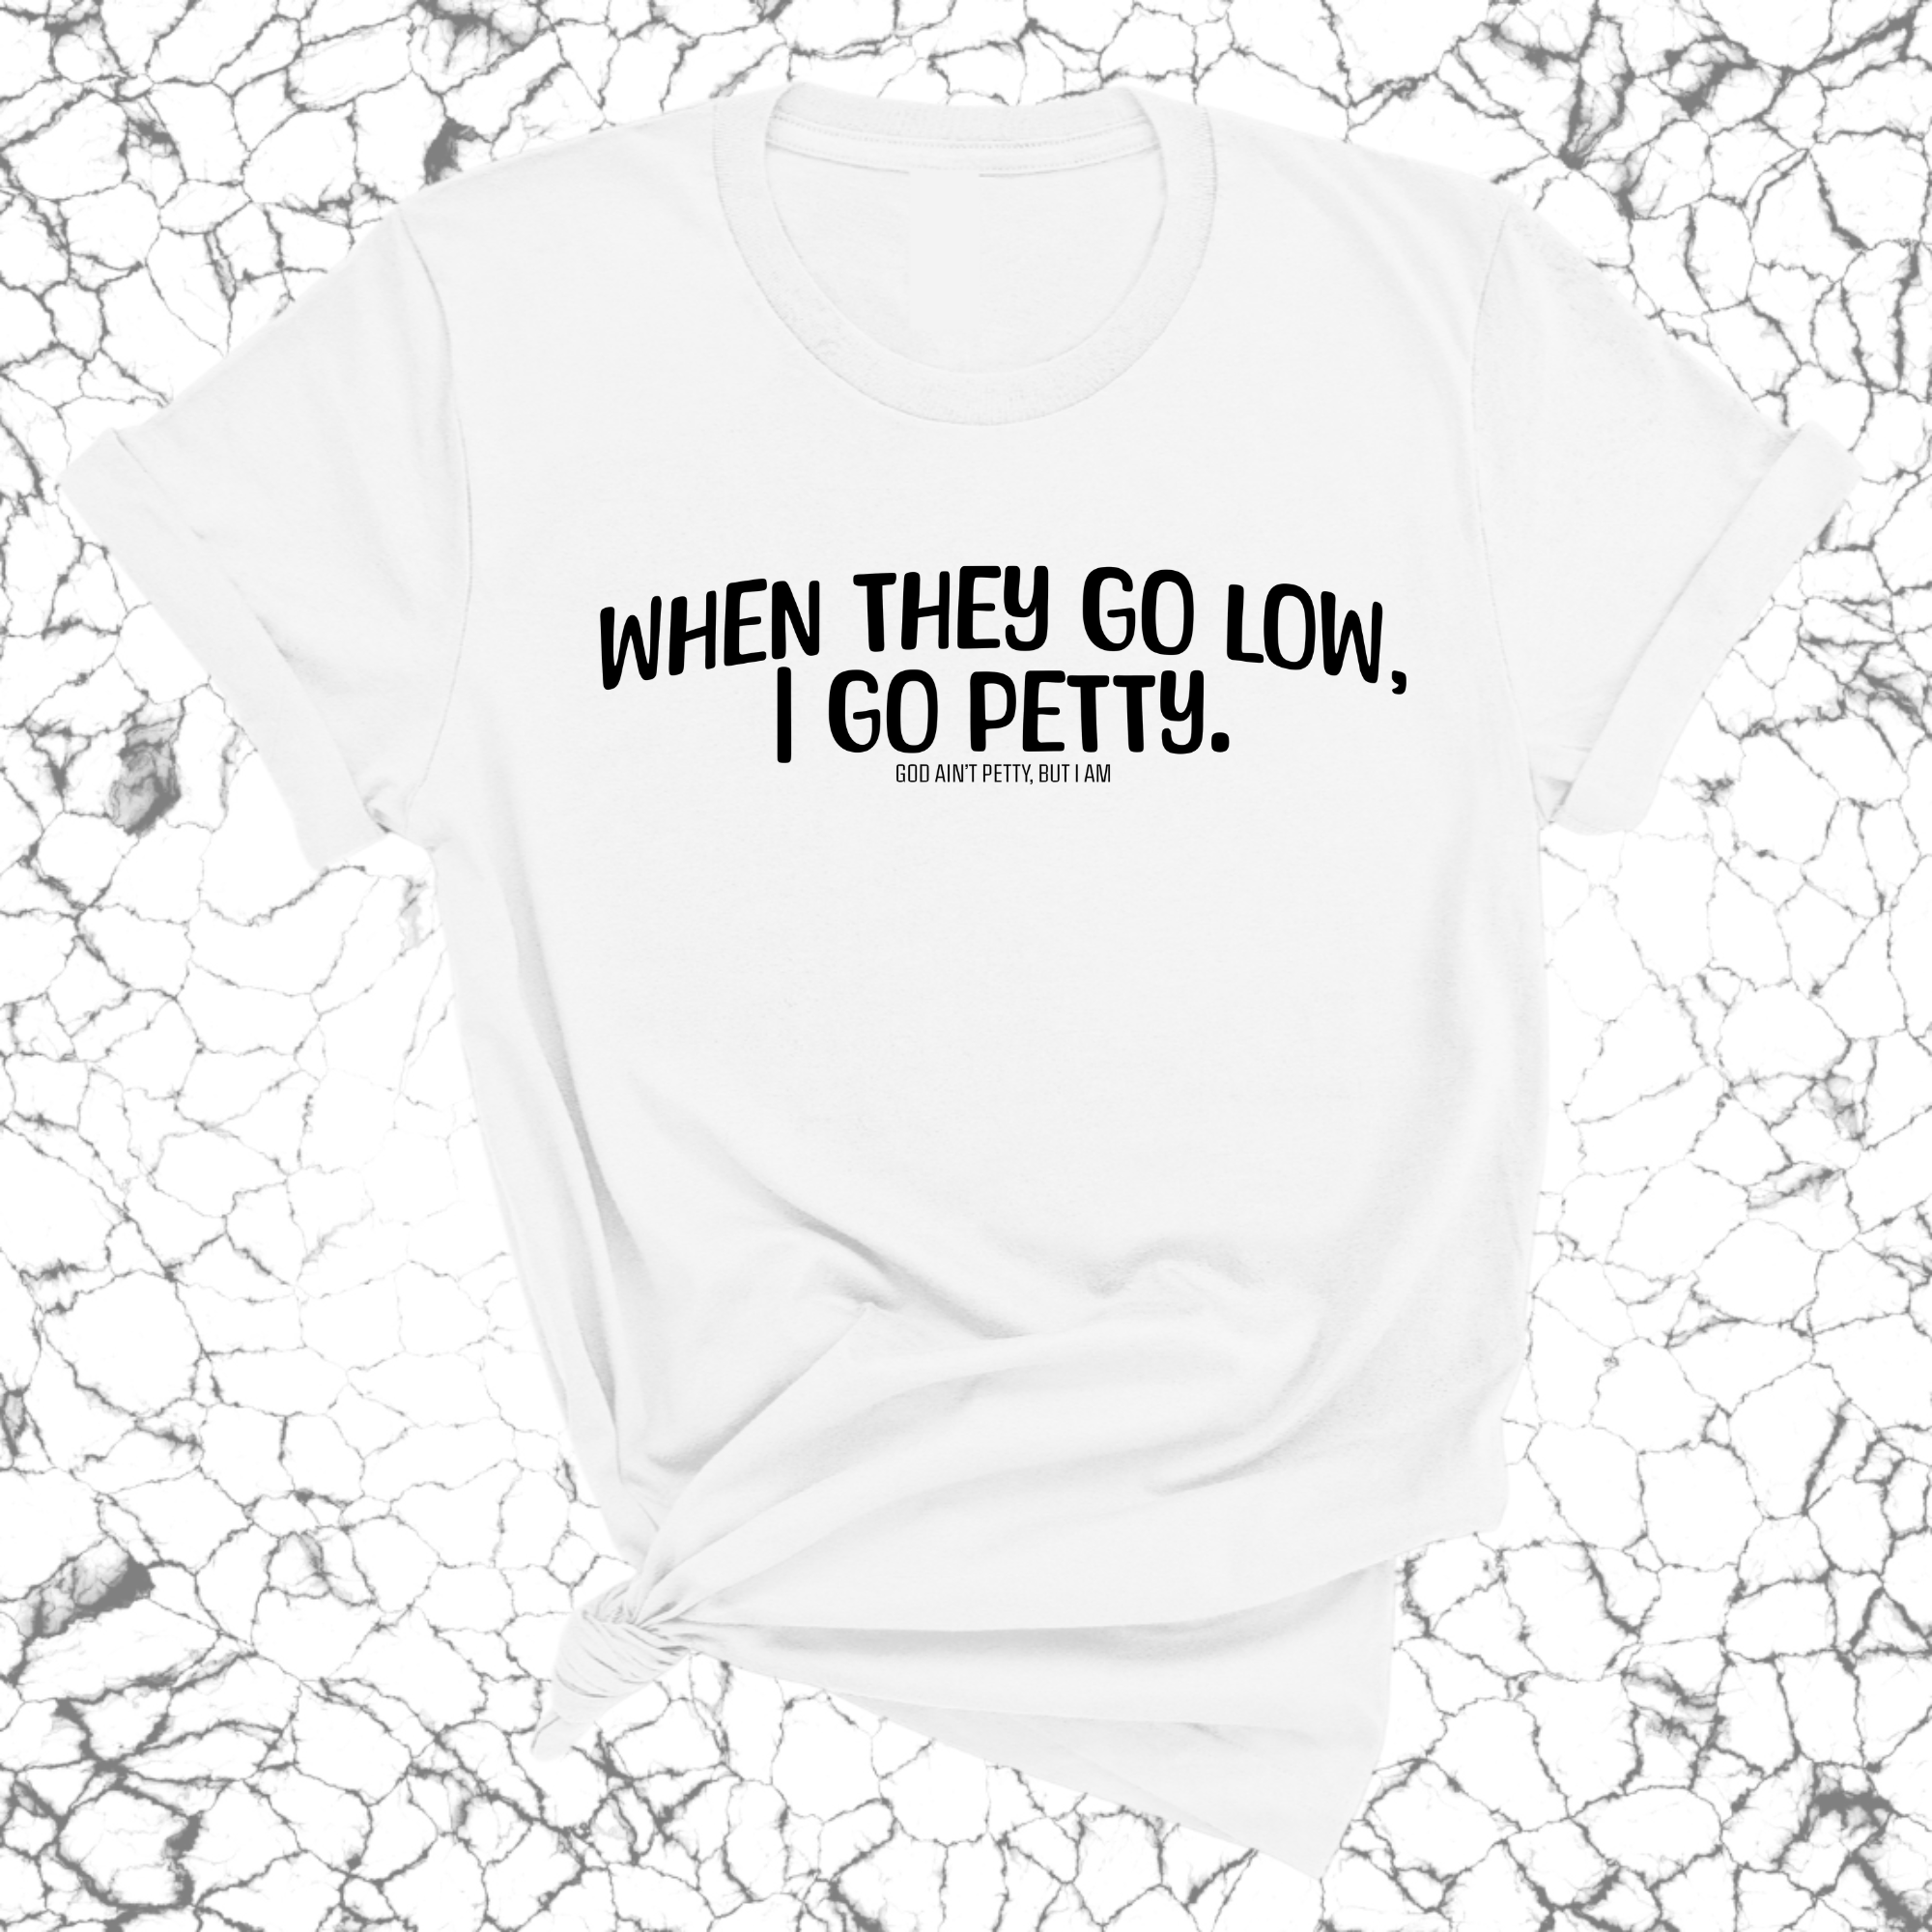 When they go low I go petty Unisex Tee-T-Shirt-The Original God Ain't Petty But I Am